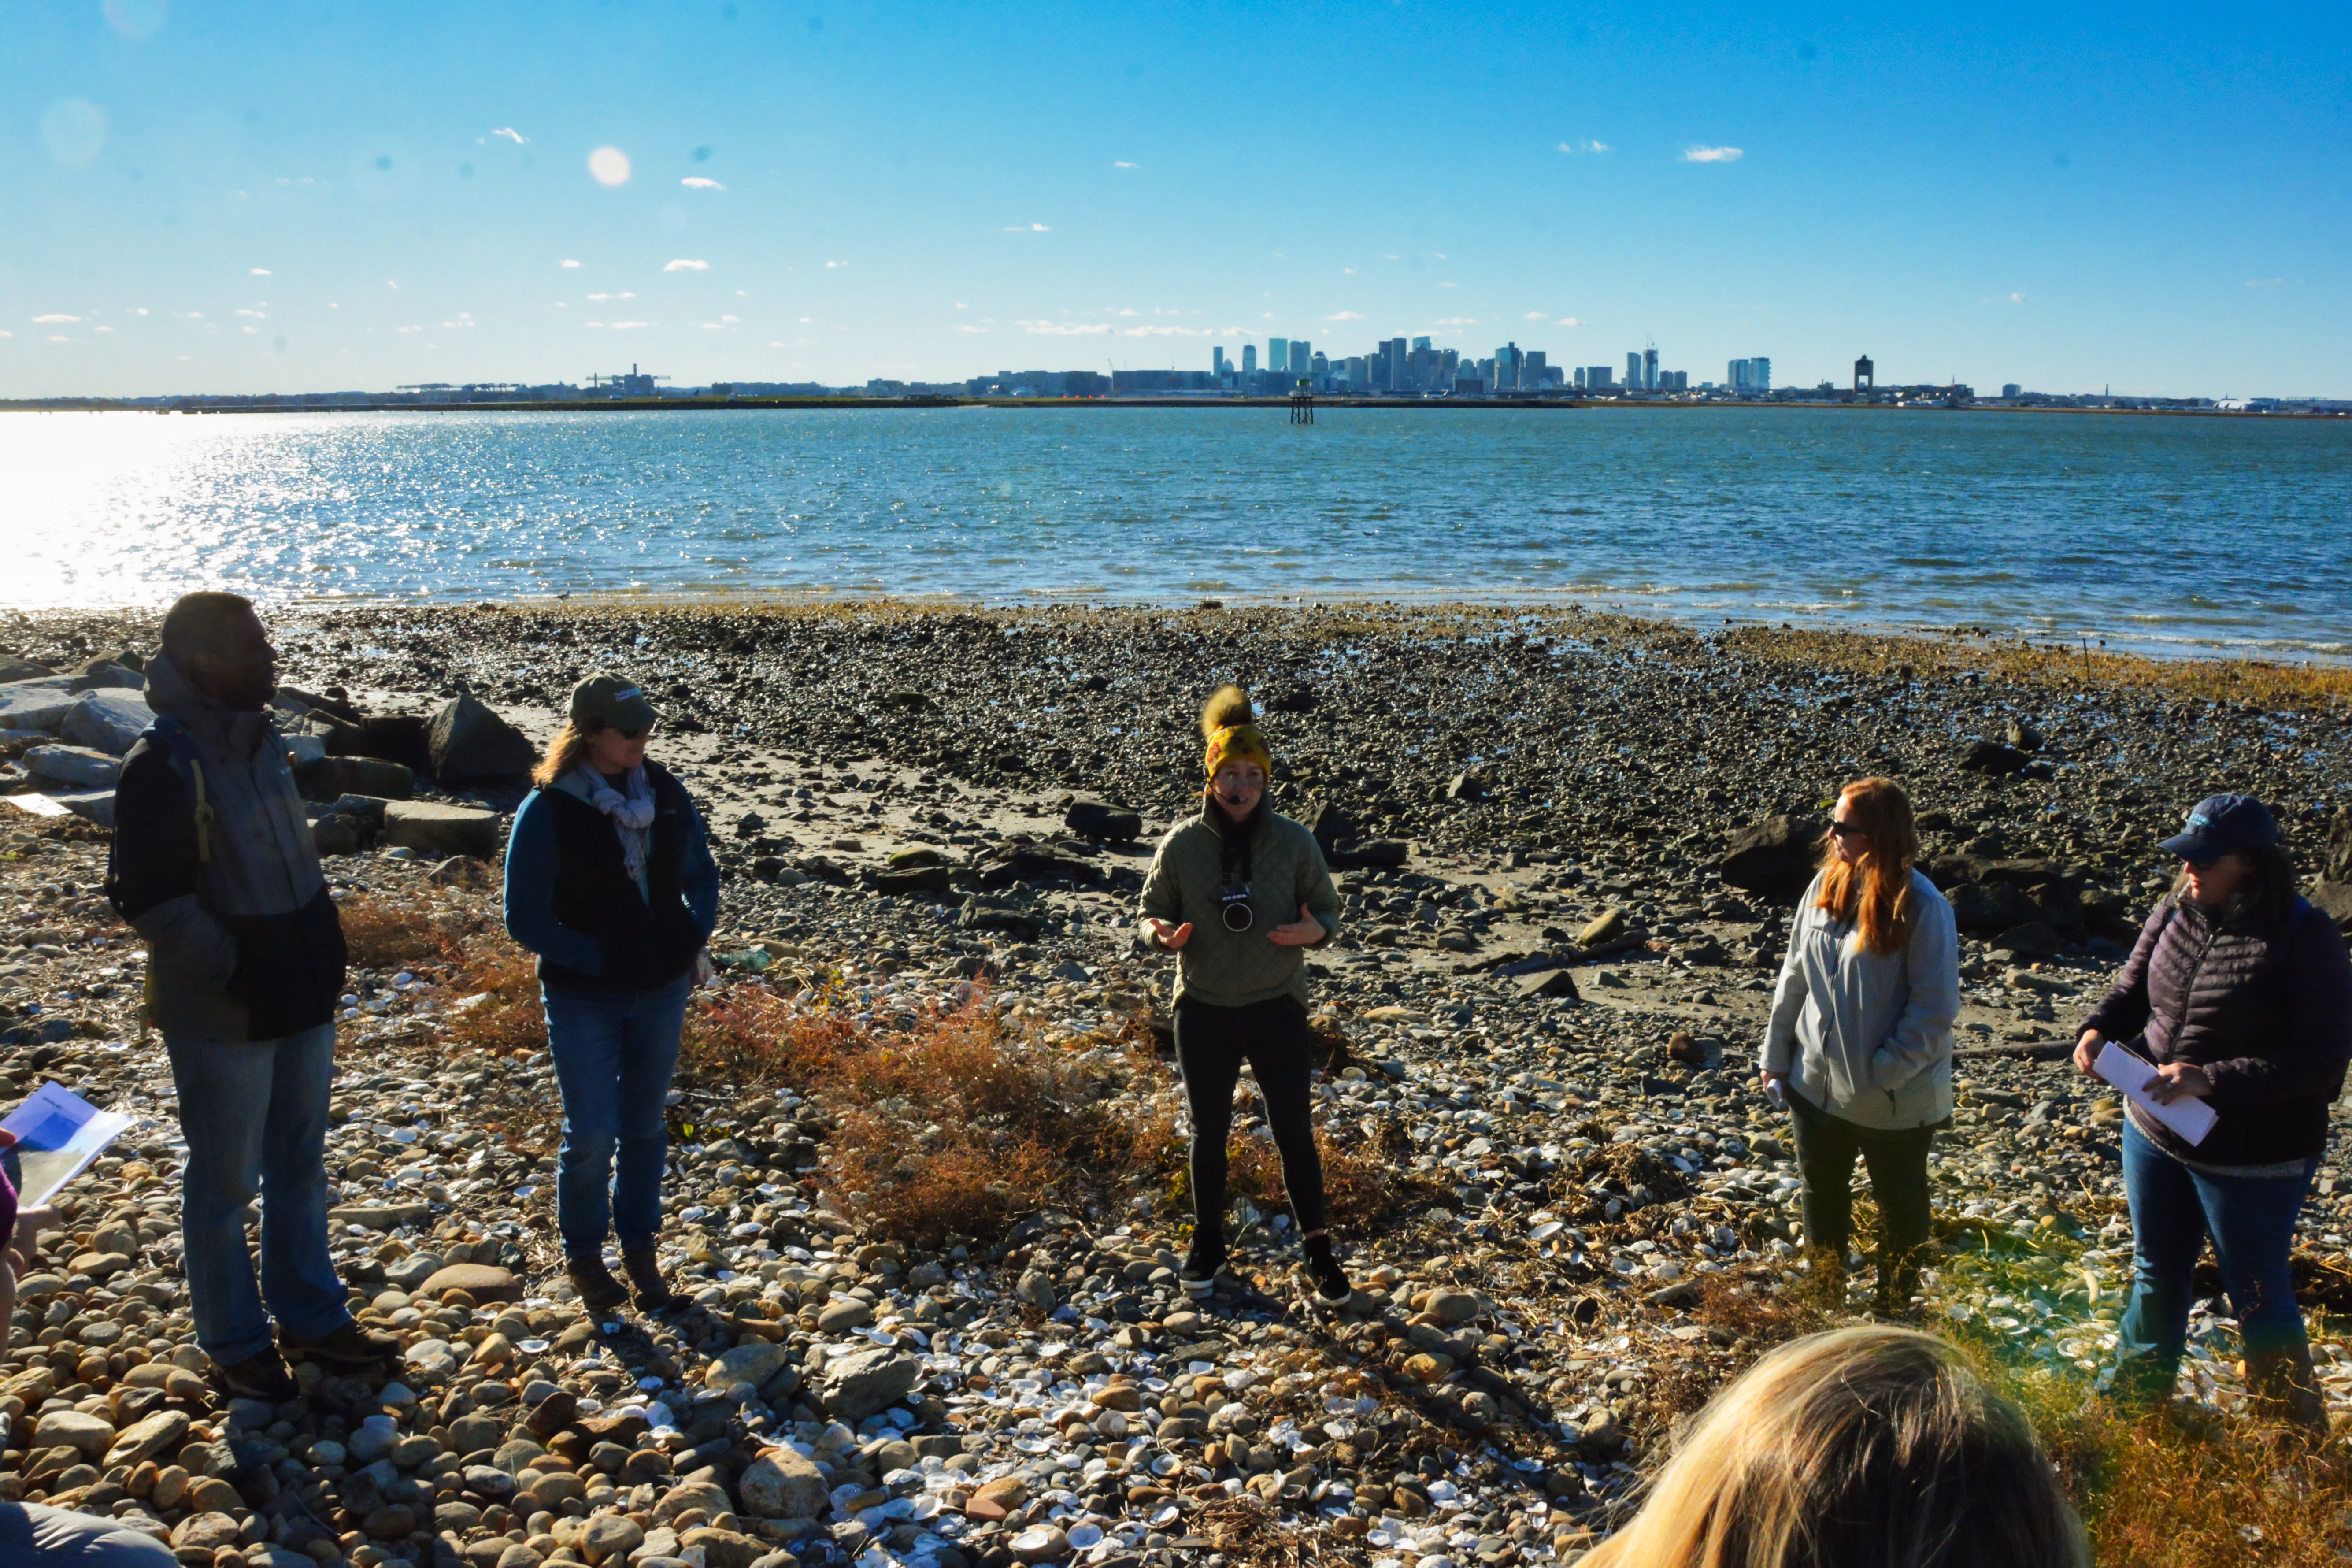 Participants learn about a shoreline restoration project at Coughlin Park in Winthrop during a conference field trip. The project was completed by the Woods Hole Group and is being monitored by the Stone Living Lab team.